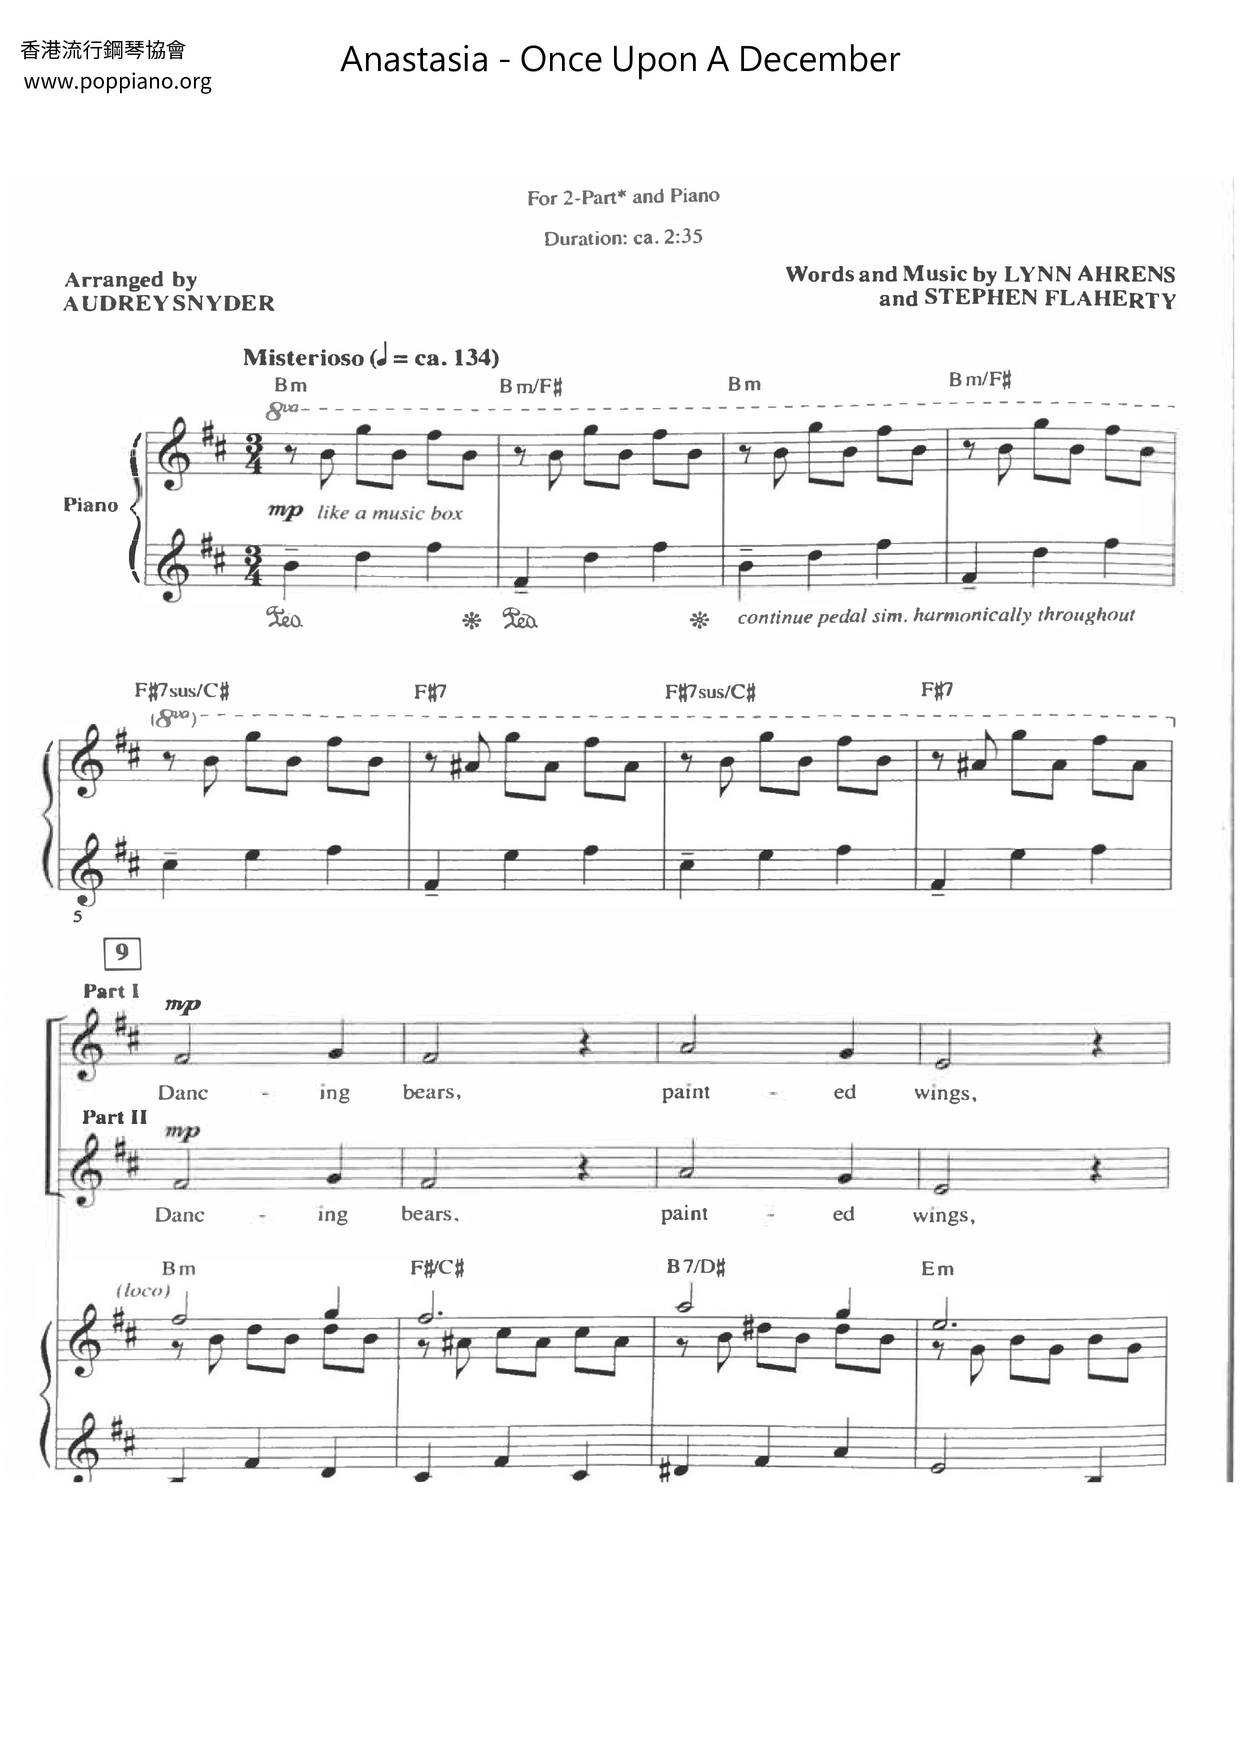 Anastasia - Once Upon A December Score